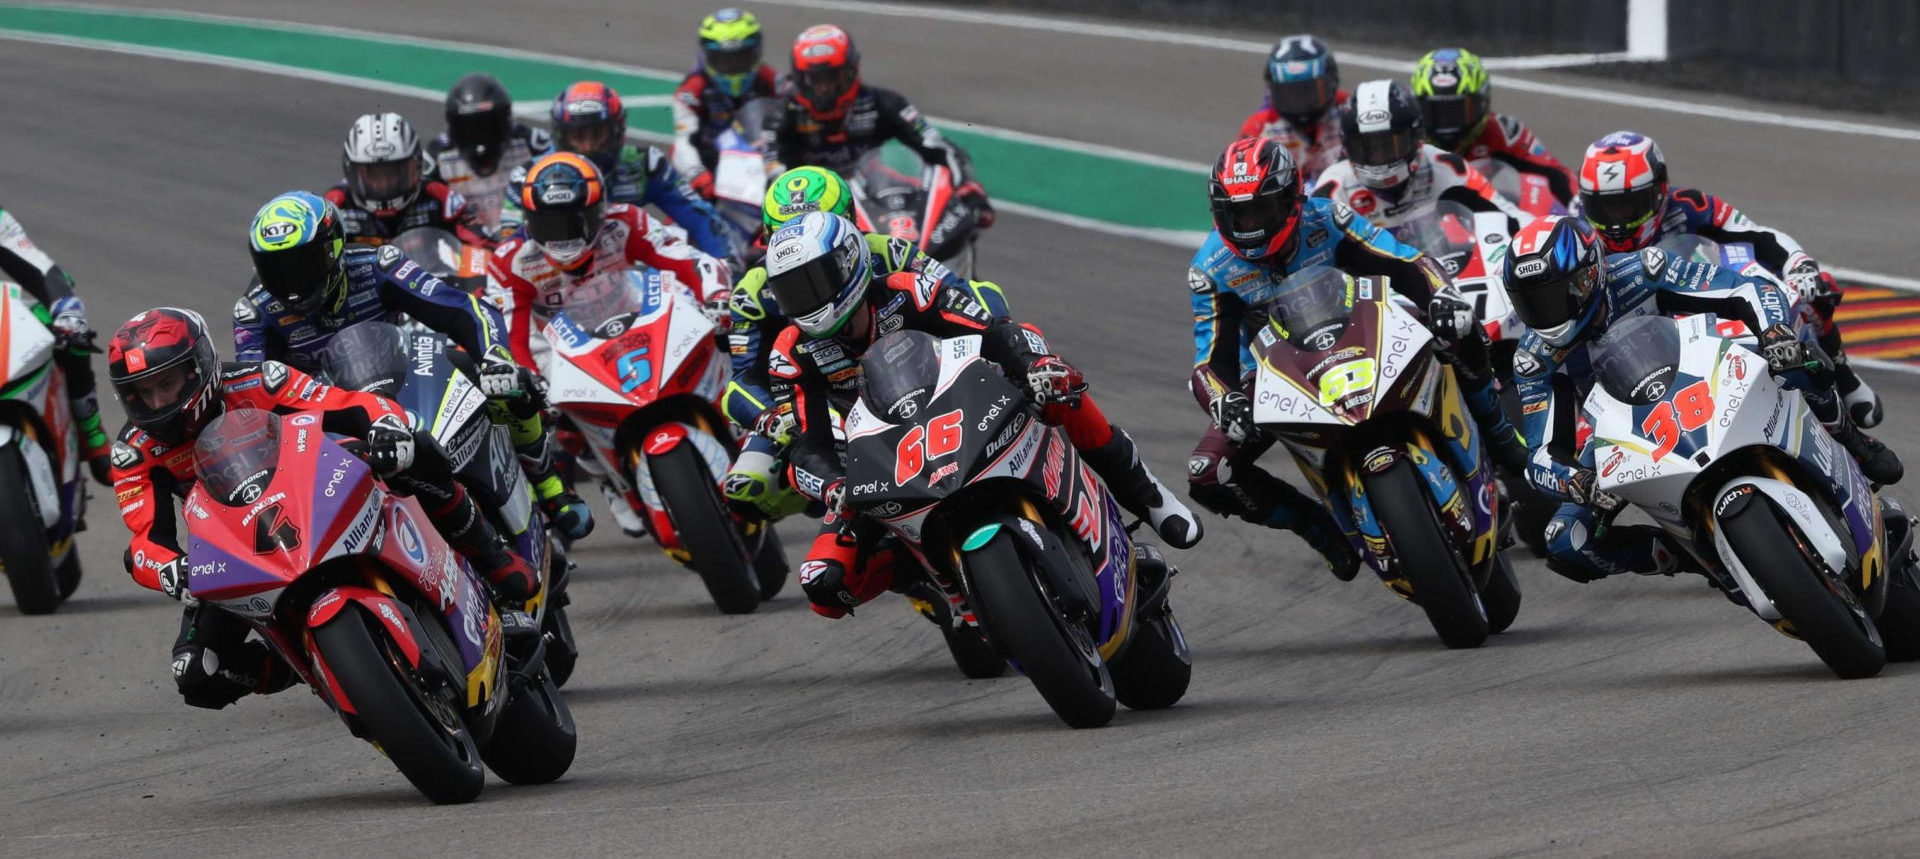 The start of the MotoE World Cup race at Sachsenring. Photo courtesy of Dorna.